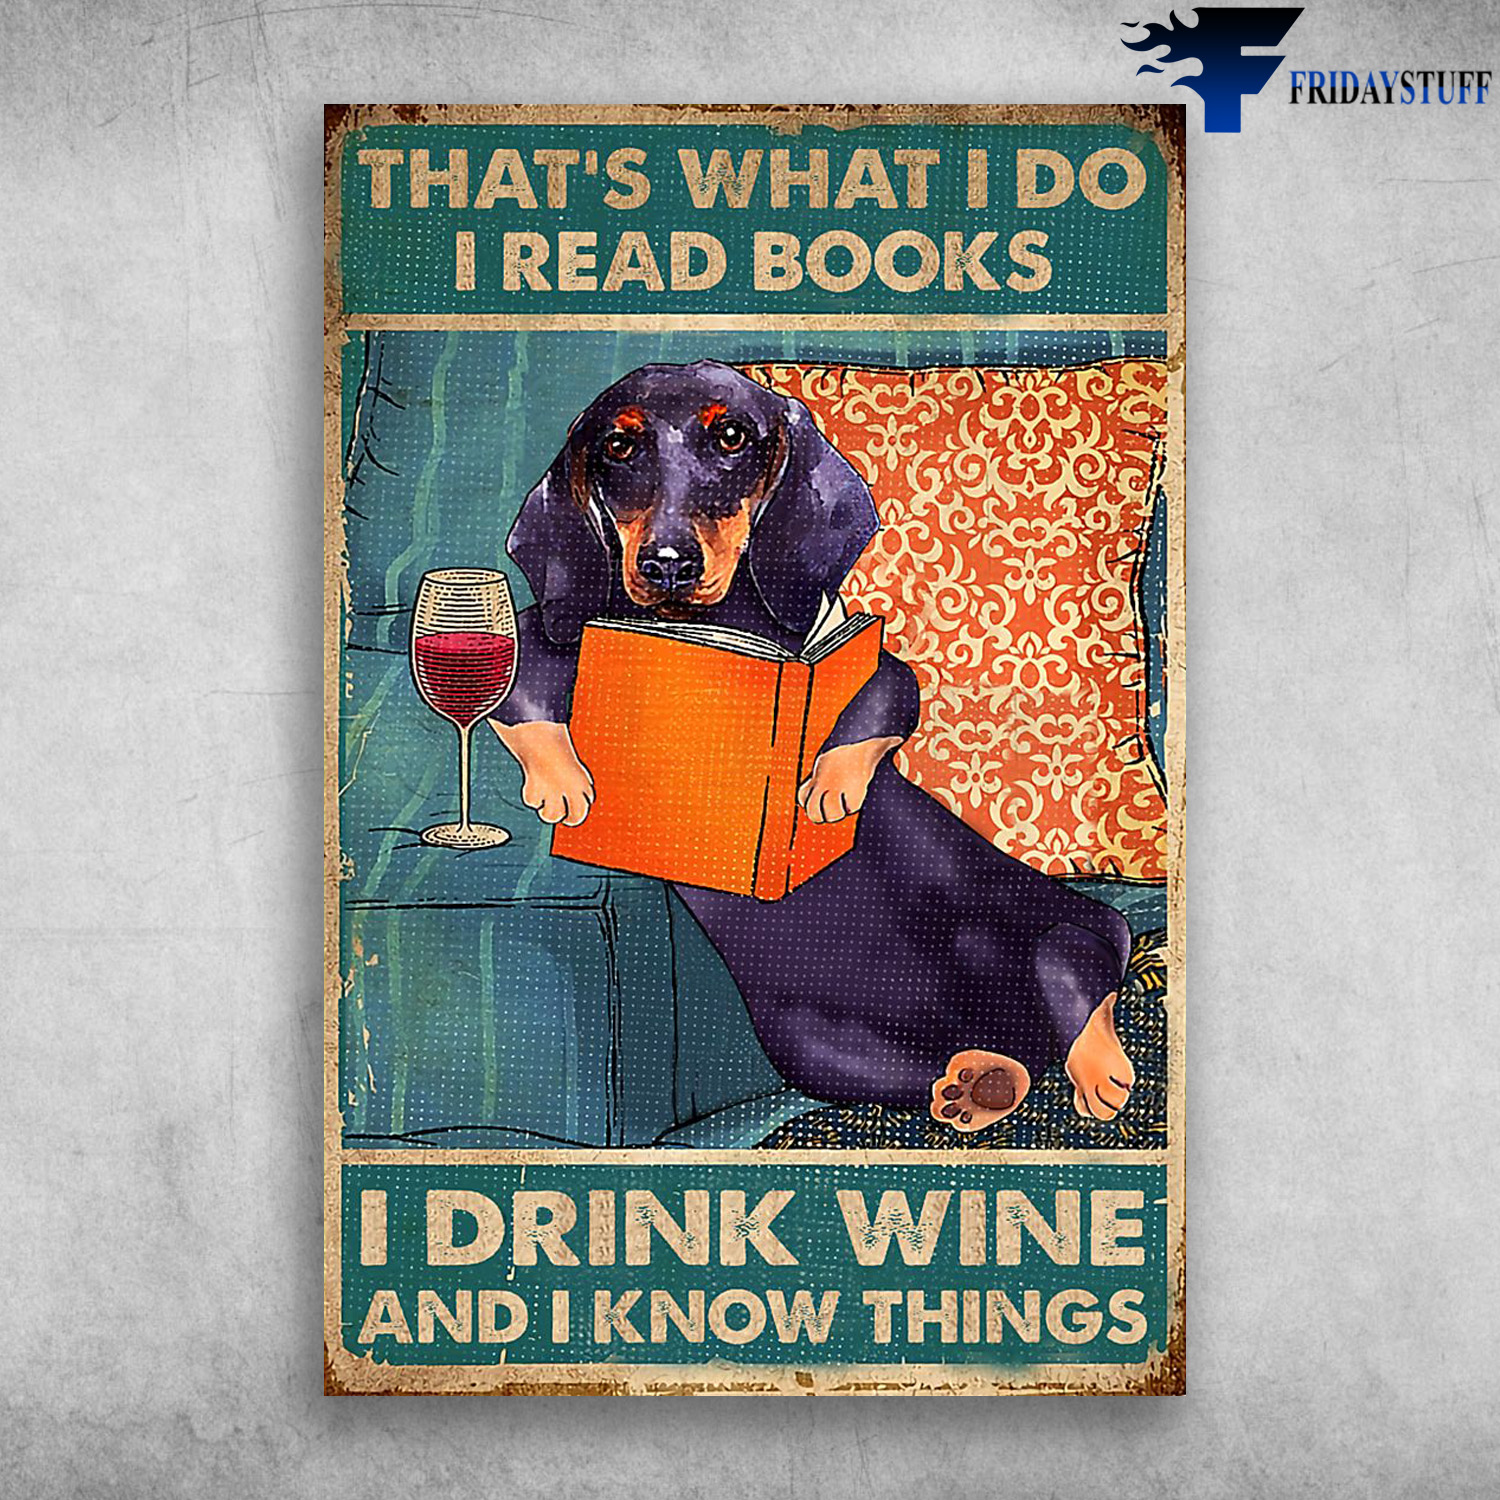 Dachshund Dog Reading Book And Wine - That't What I Do, I Read Books, I Drink Wine And I Know Things,